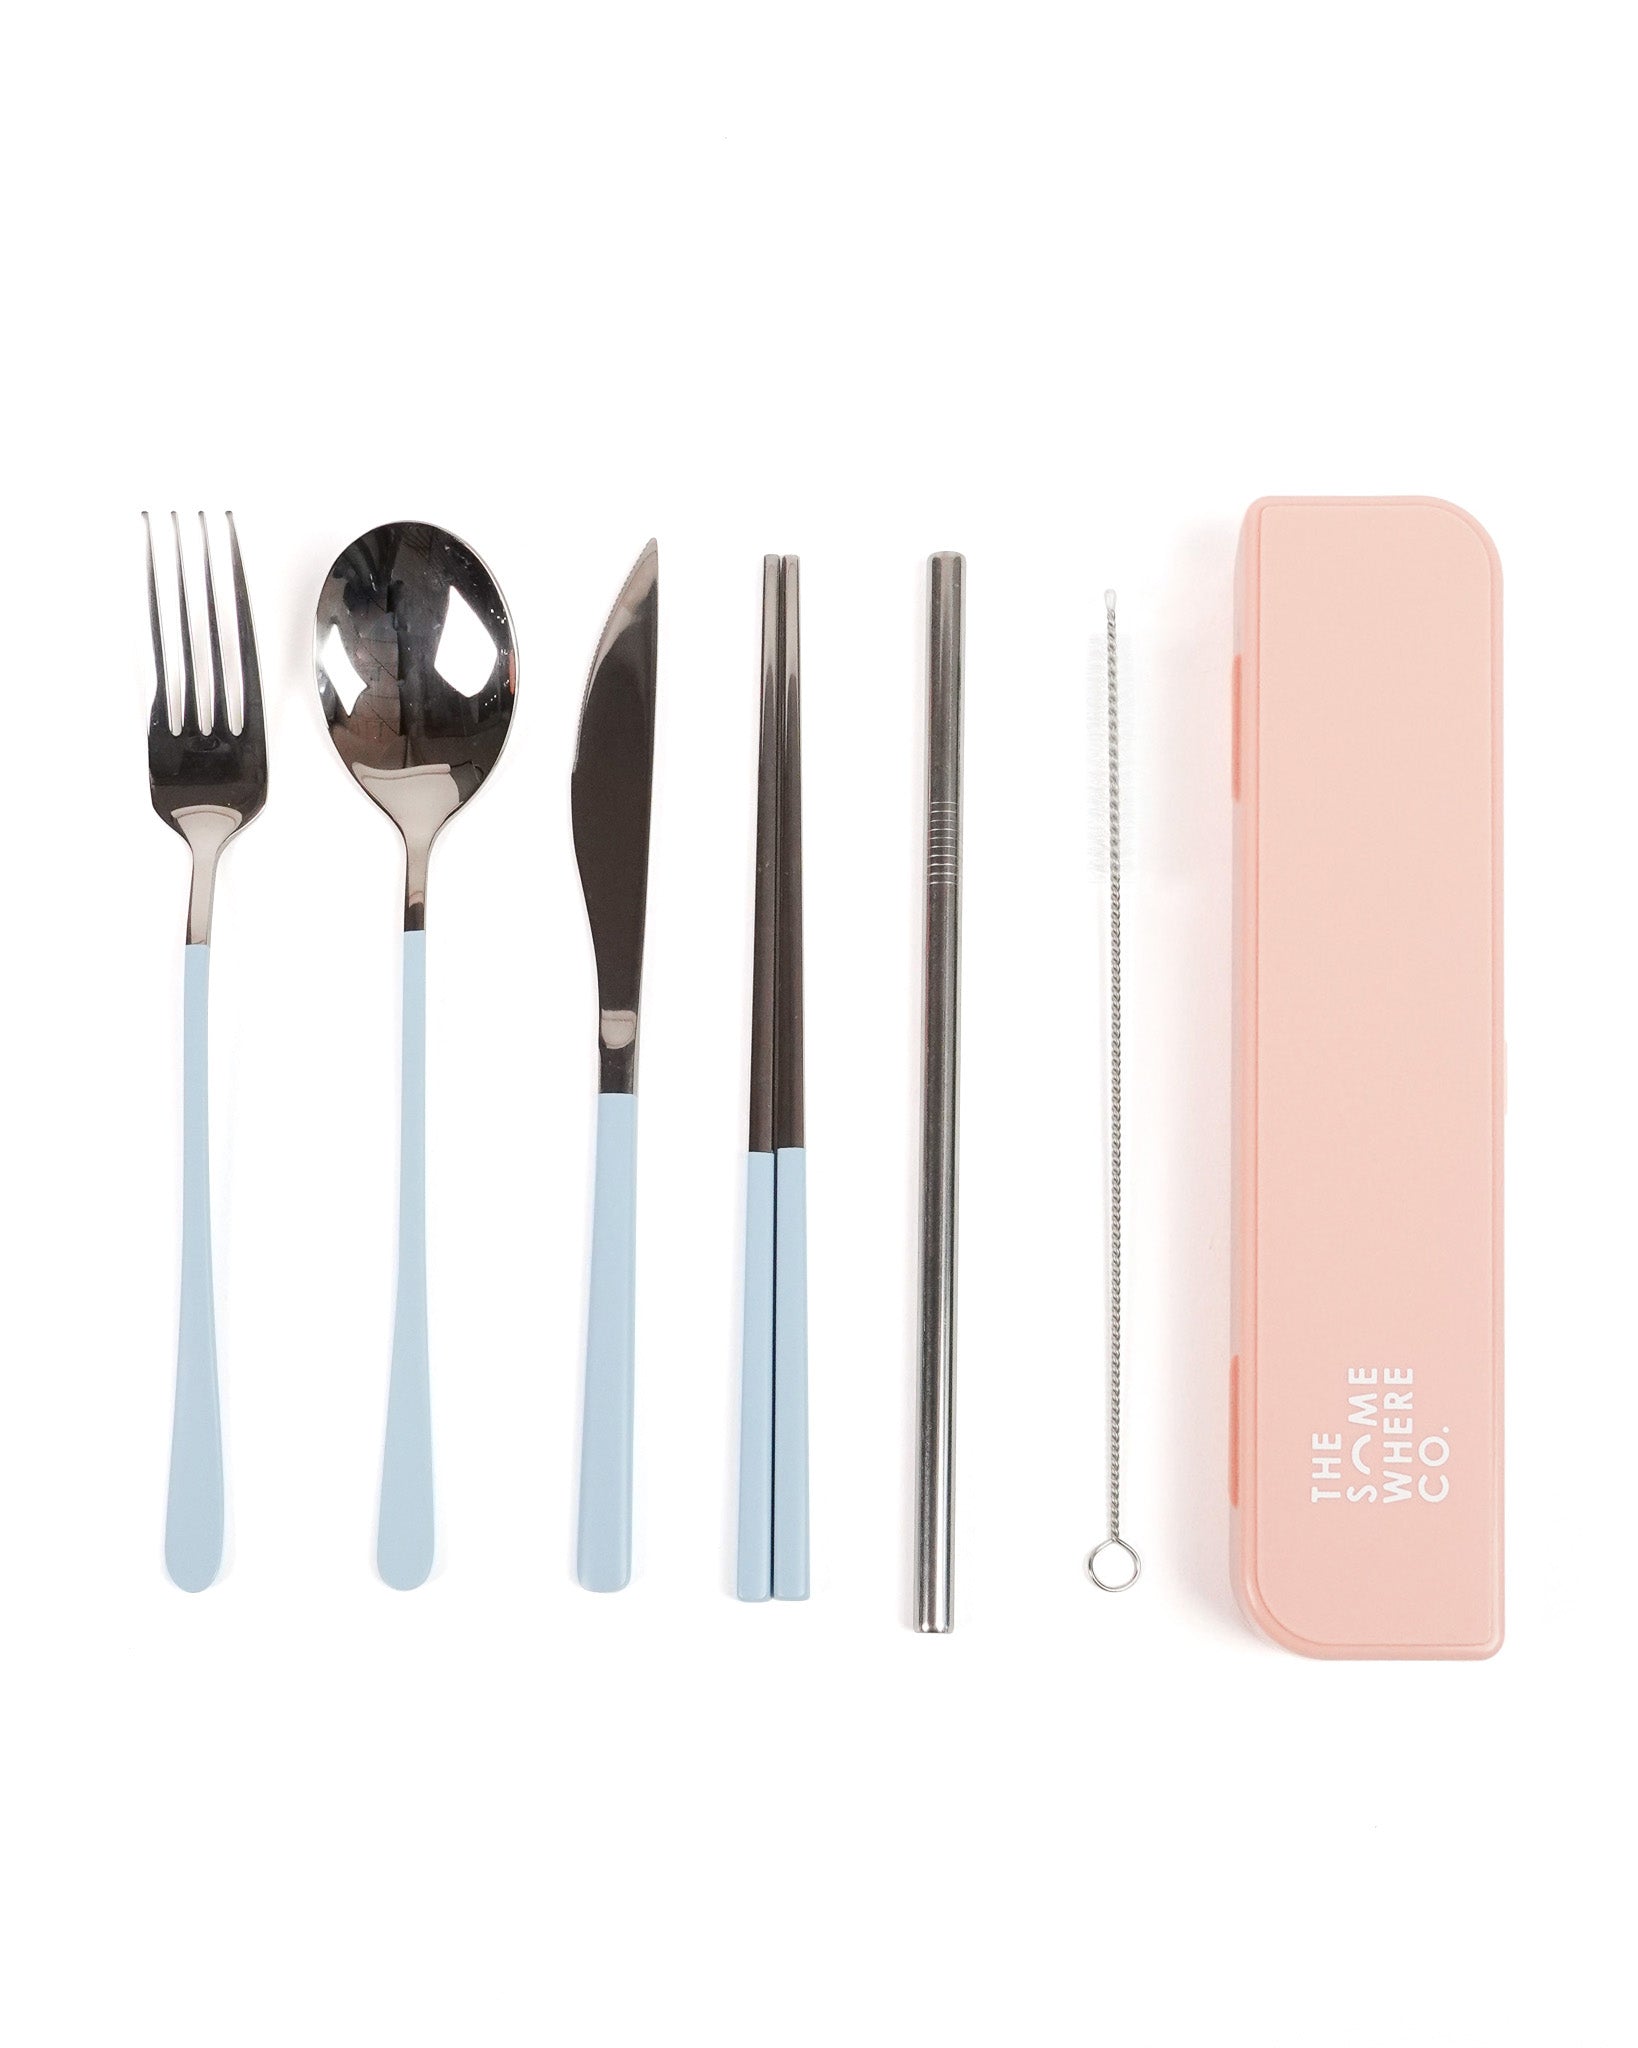 Cutlery Kit - Silver with Powder Blue Handle